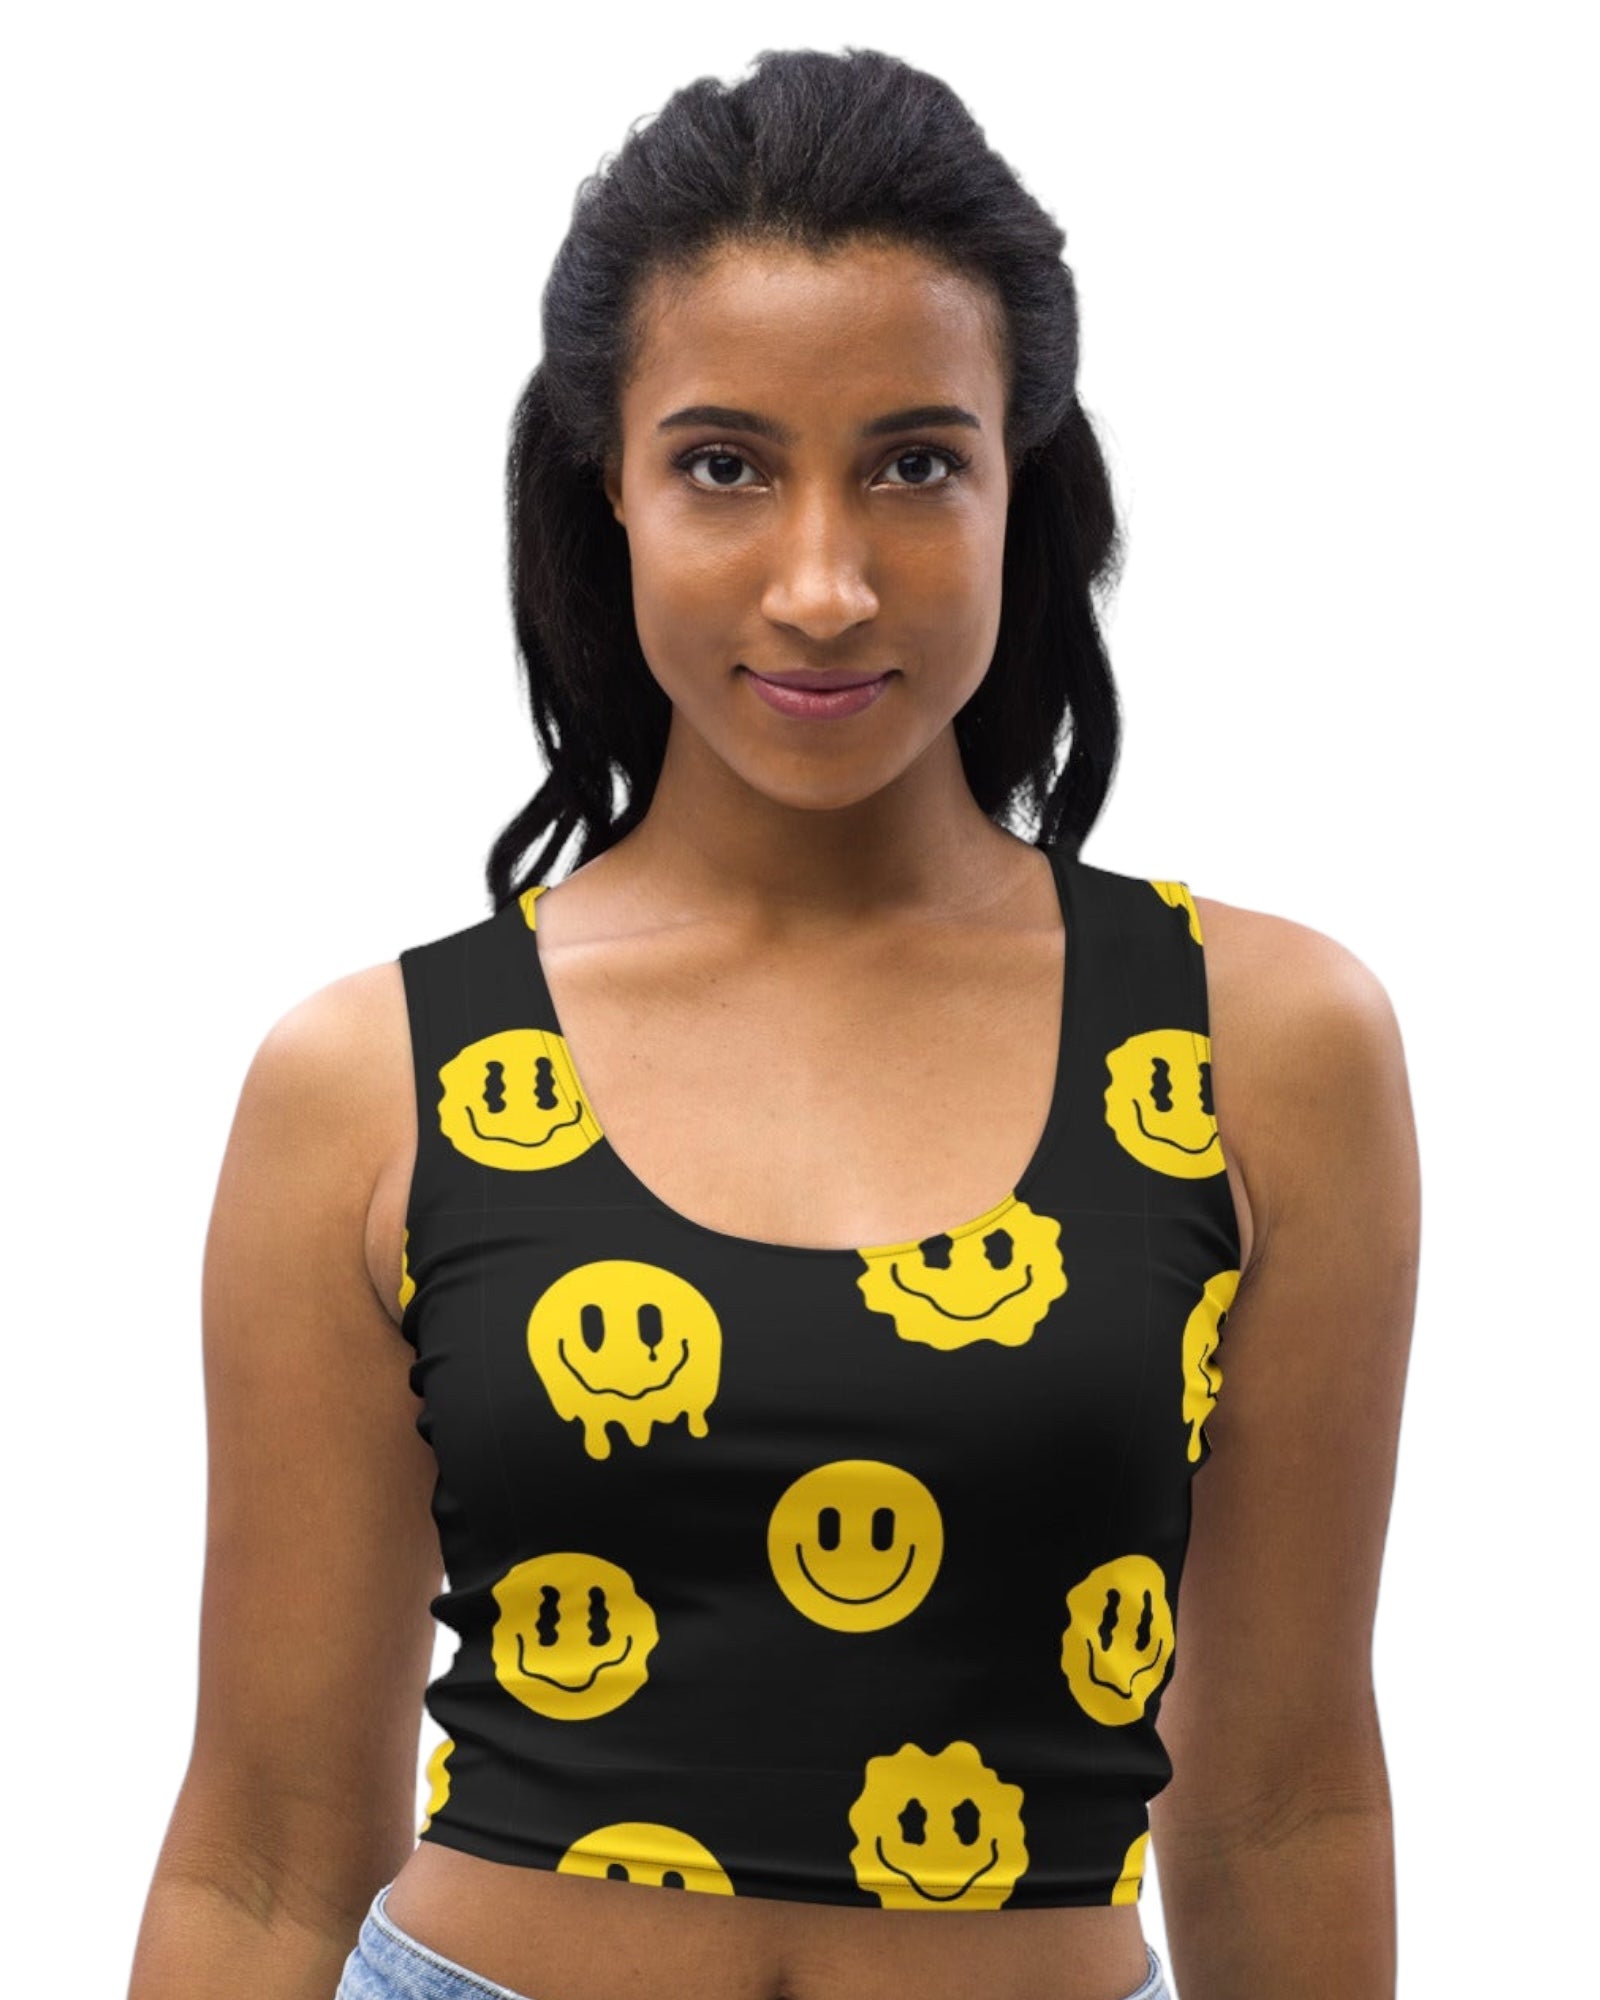 Woman wearing Trippie Crop Top by One Stop Rave - Black crop top with yellow smiley faces, a unique addition to a rave outfit